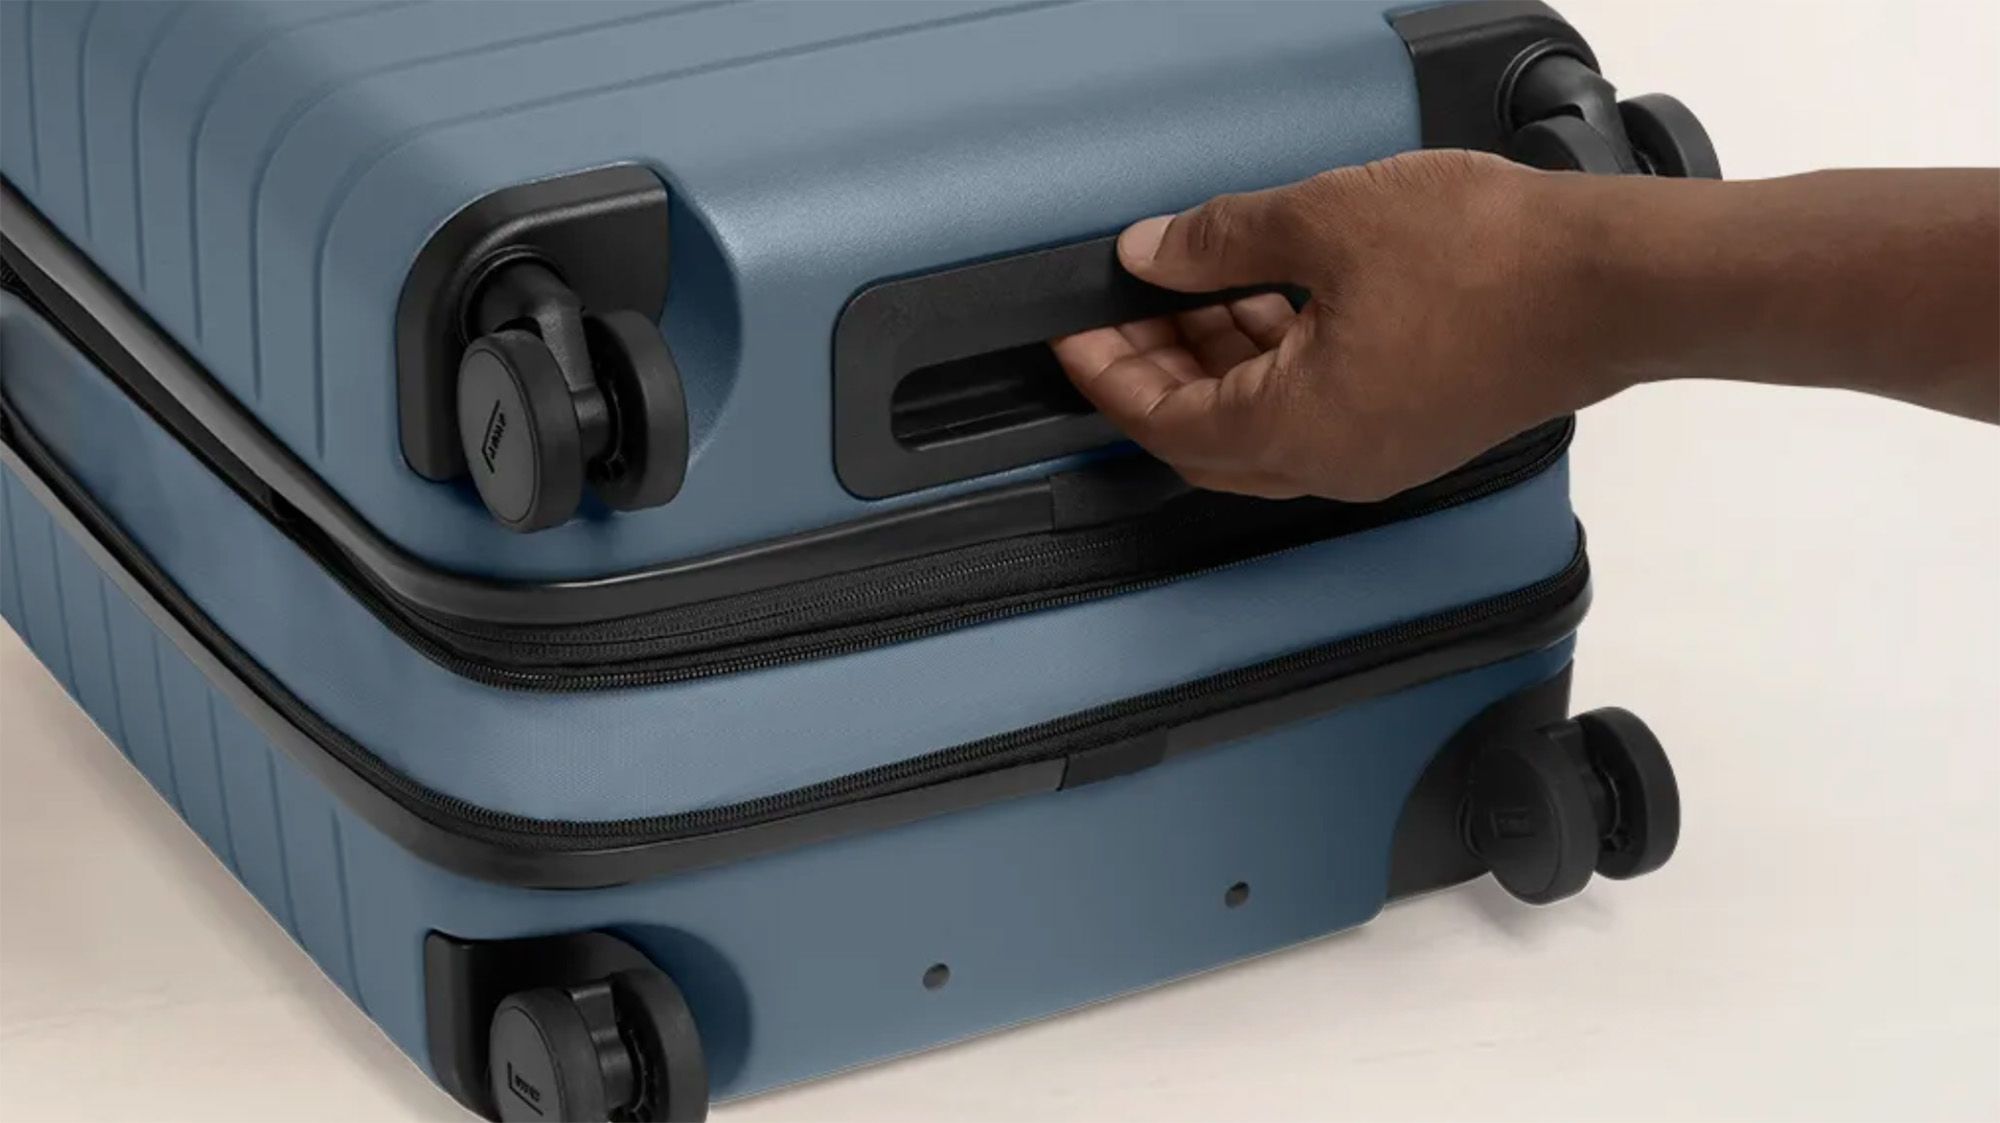 Away Luggage Just Launched Its First Expandable Hard-Sided